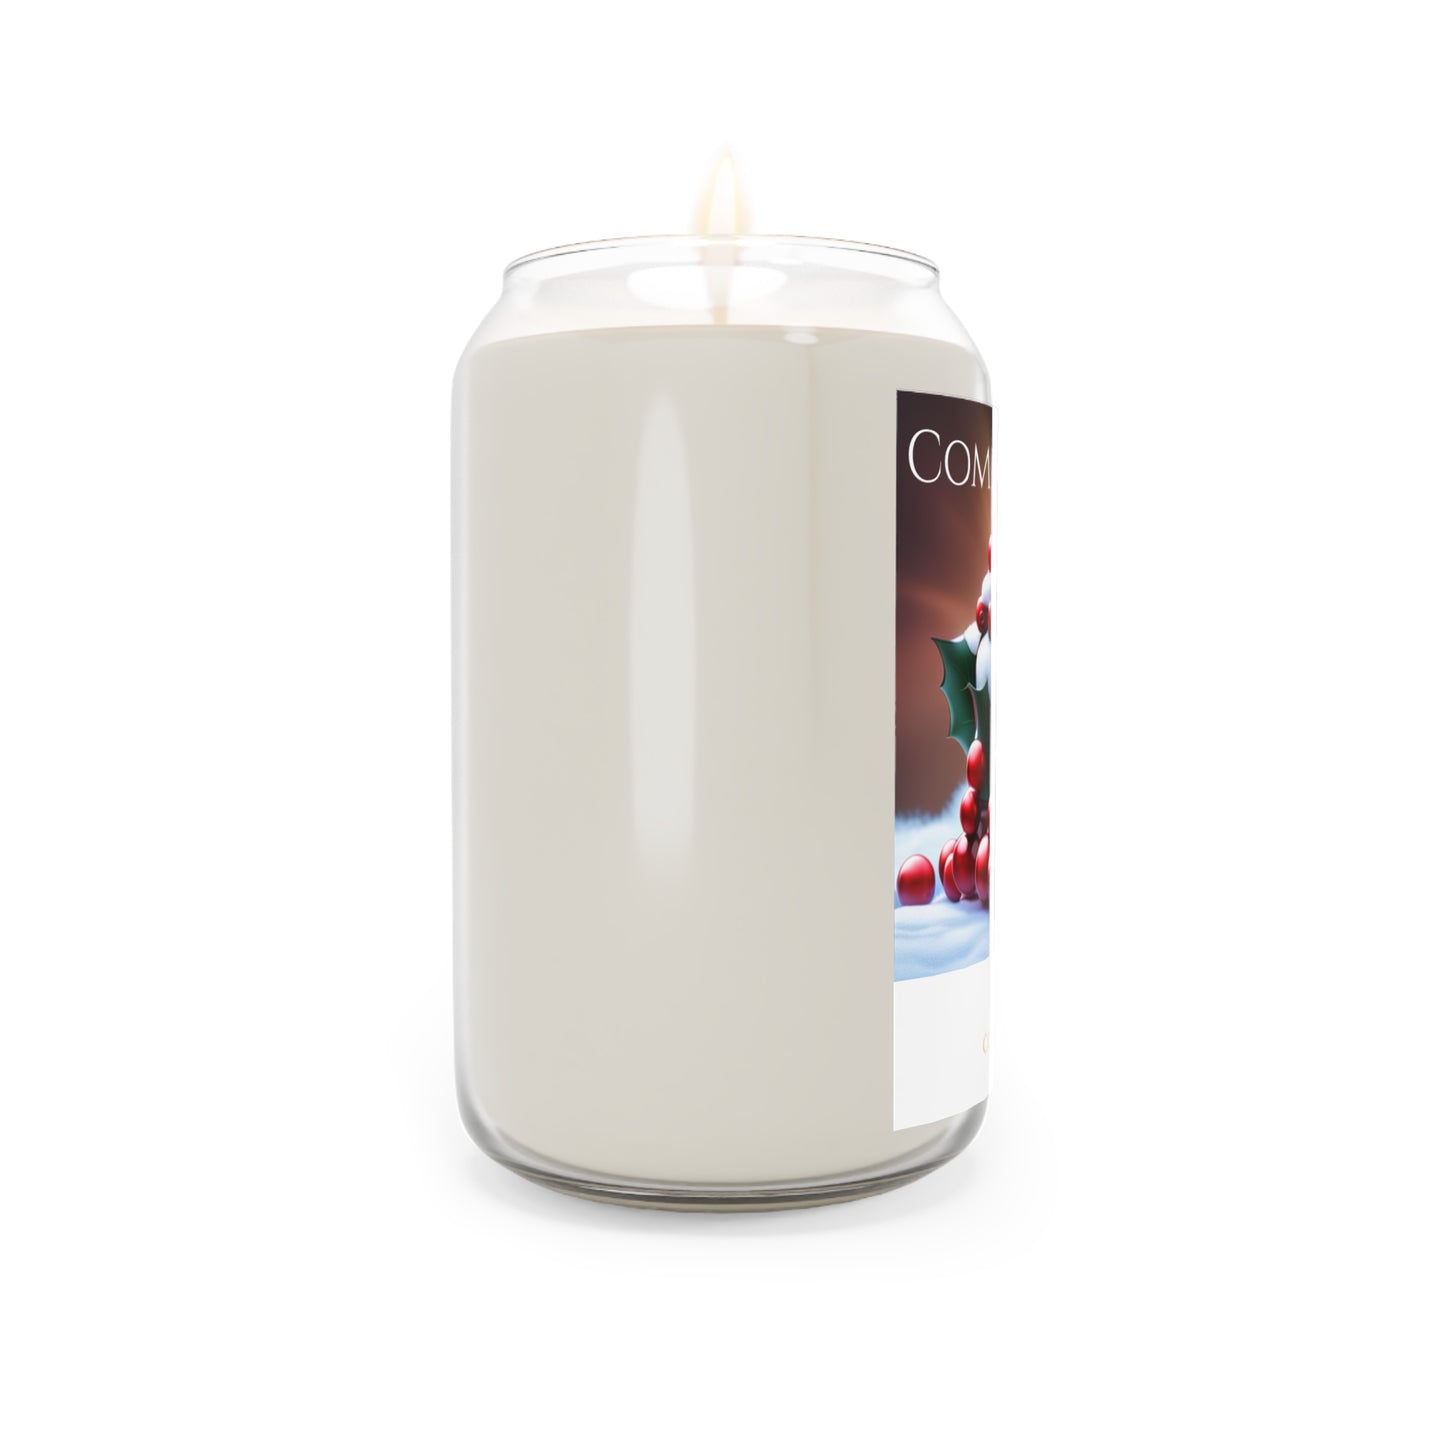 Comfort Spice Scented Candle